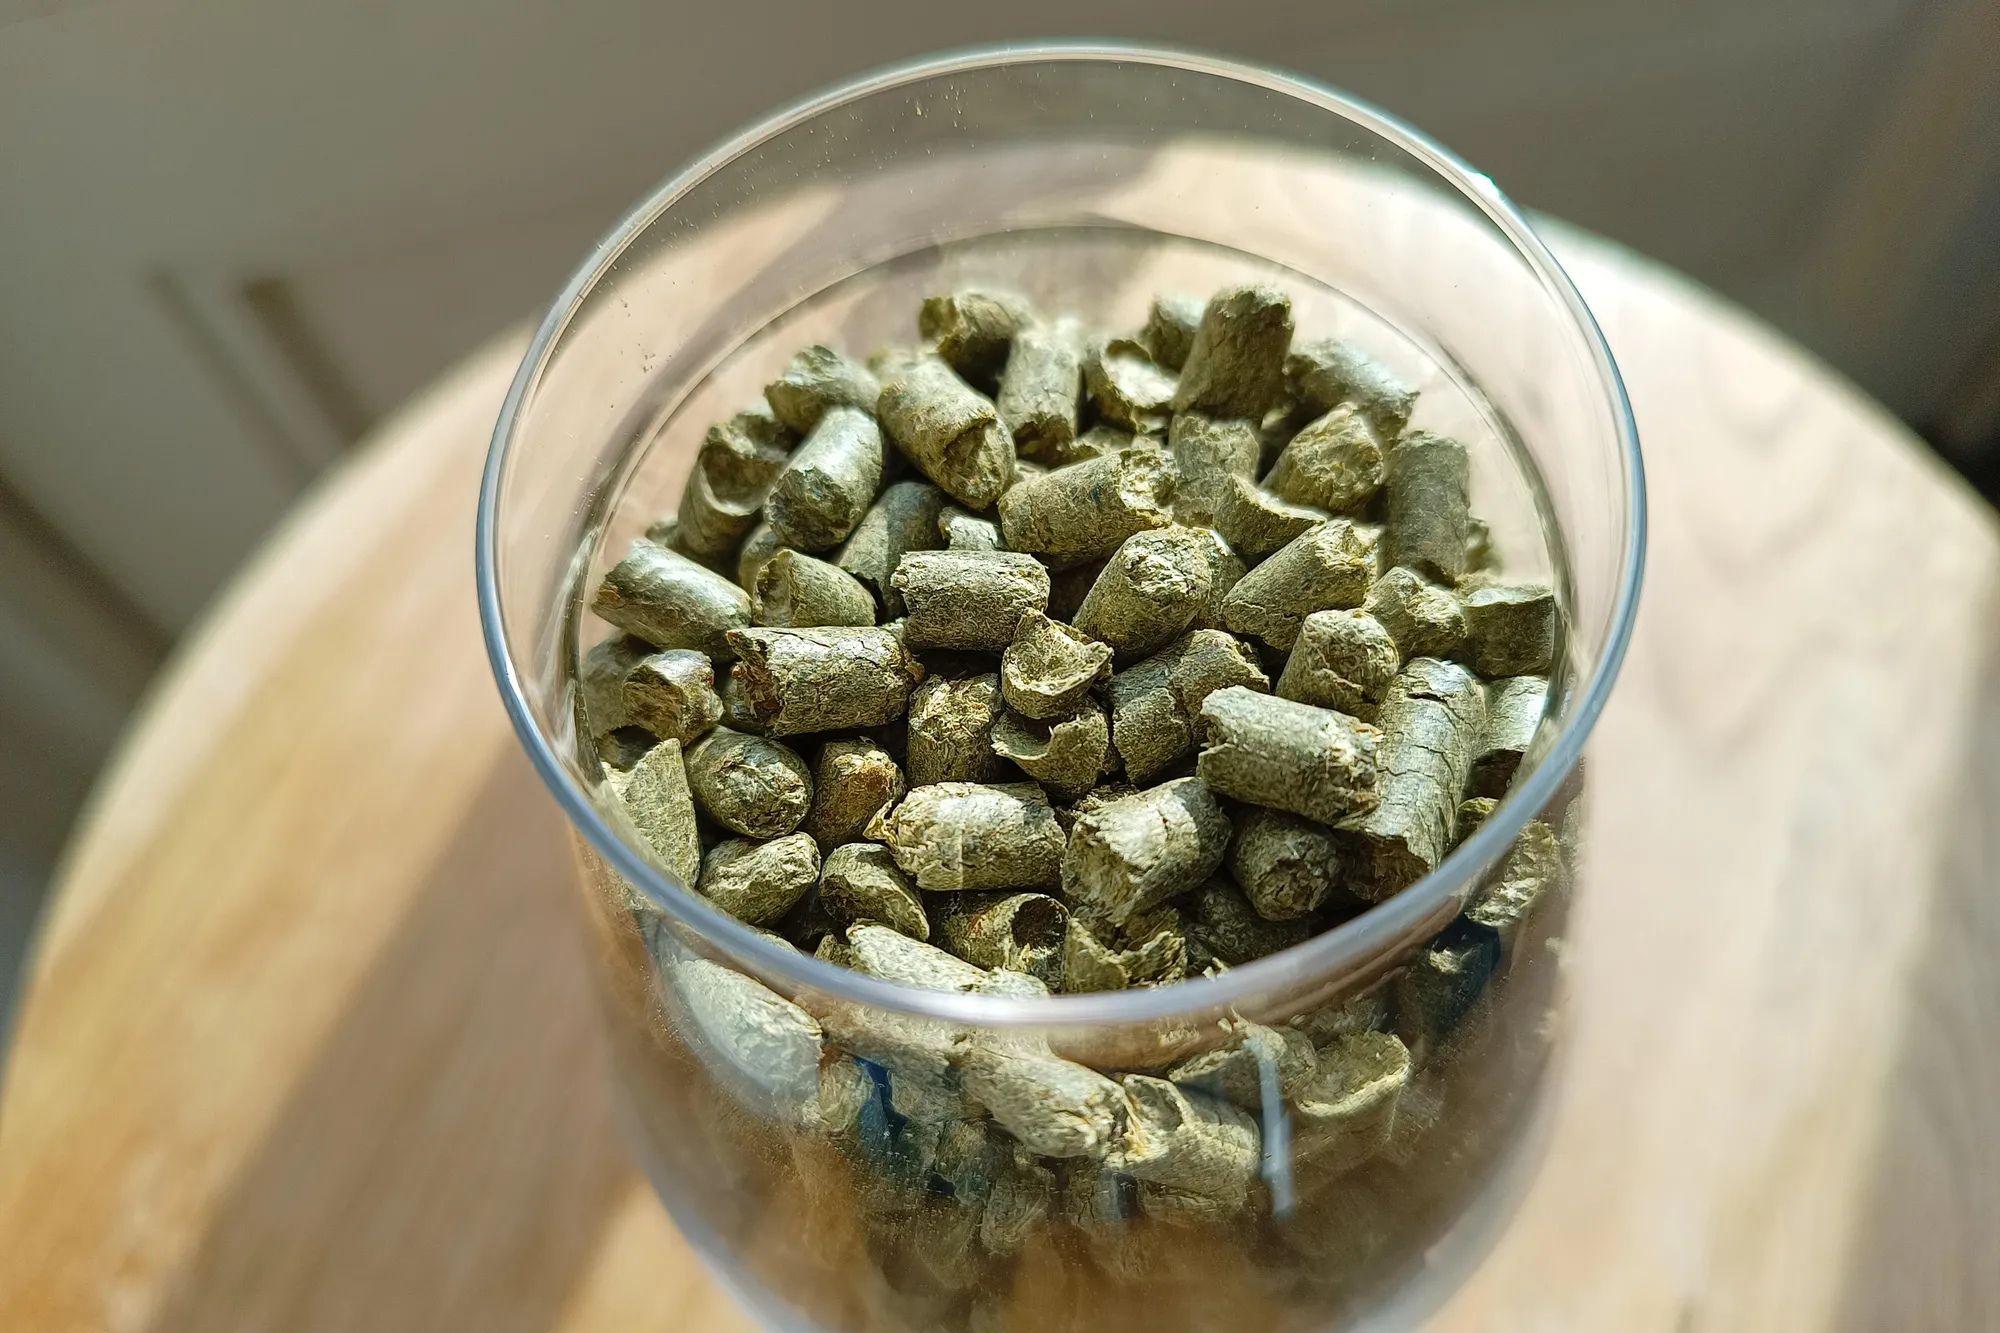 It's about the right moment for each hop addition